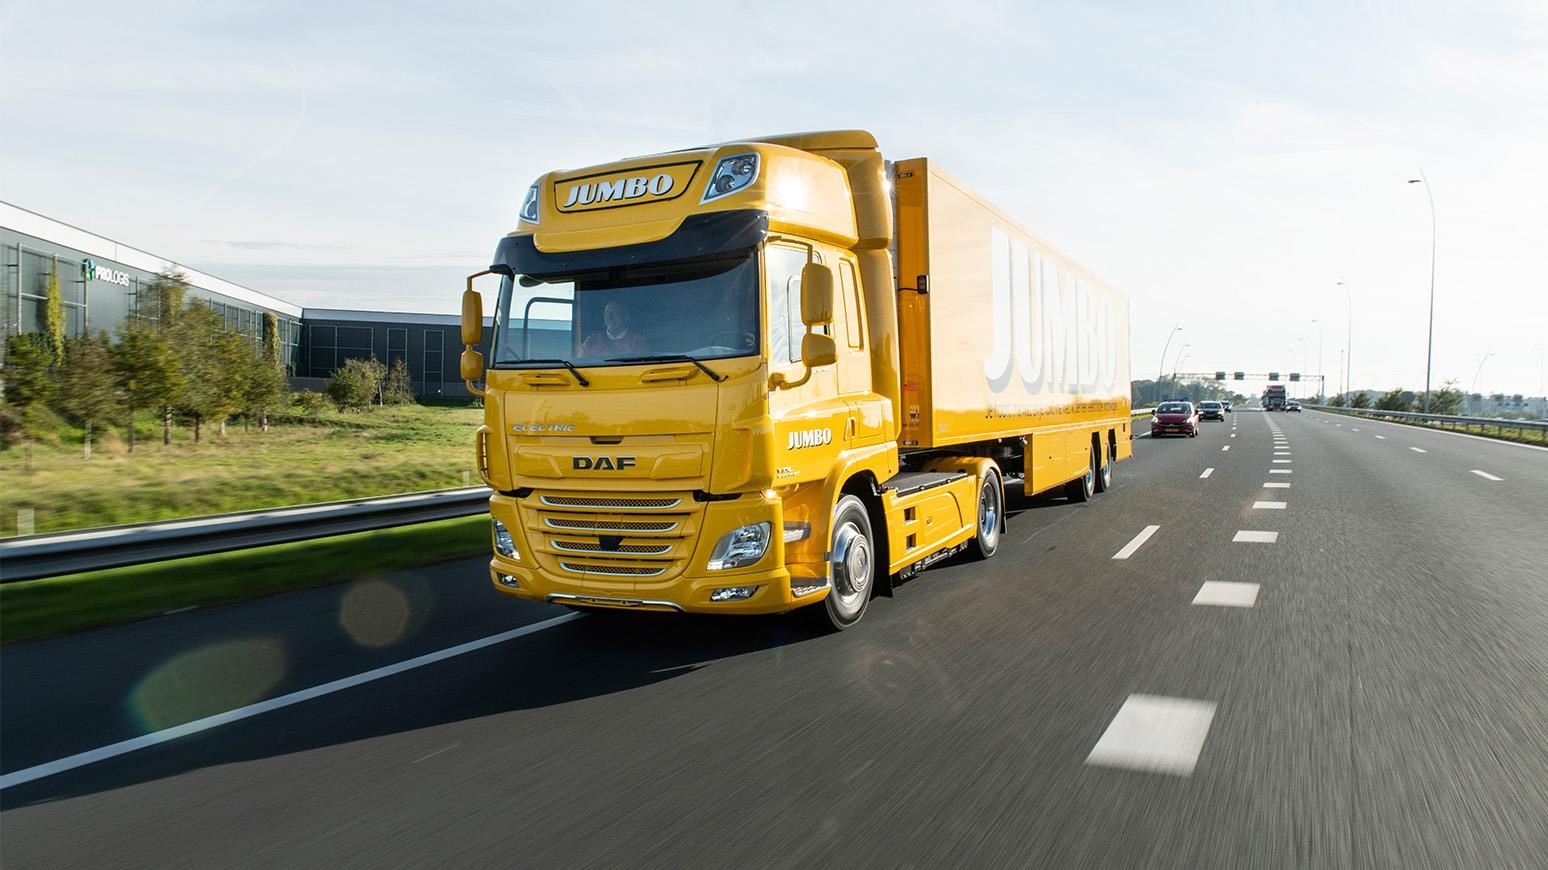 Jumbo Supermarket Chain Will Use All-Electric DAF Truck To Stock Its Shelves